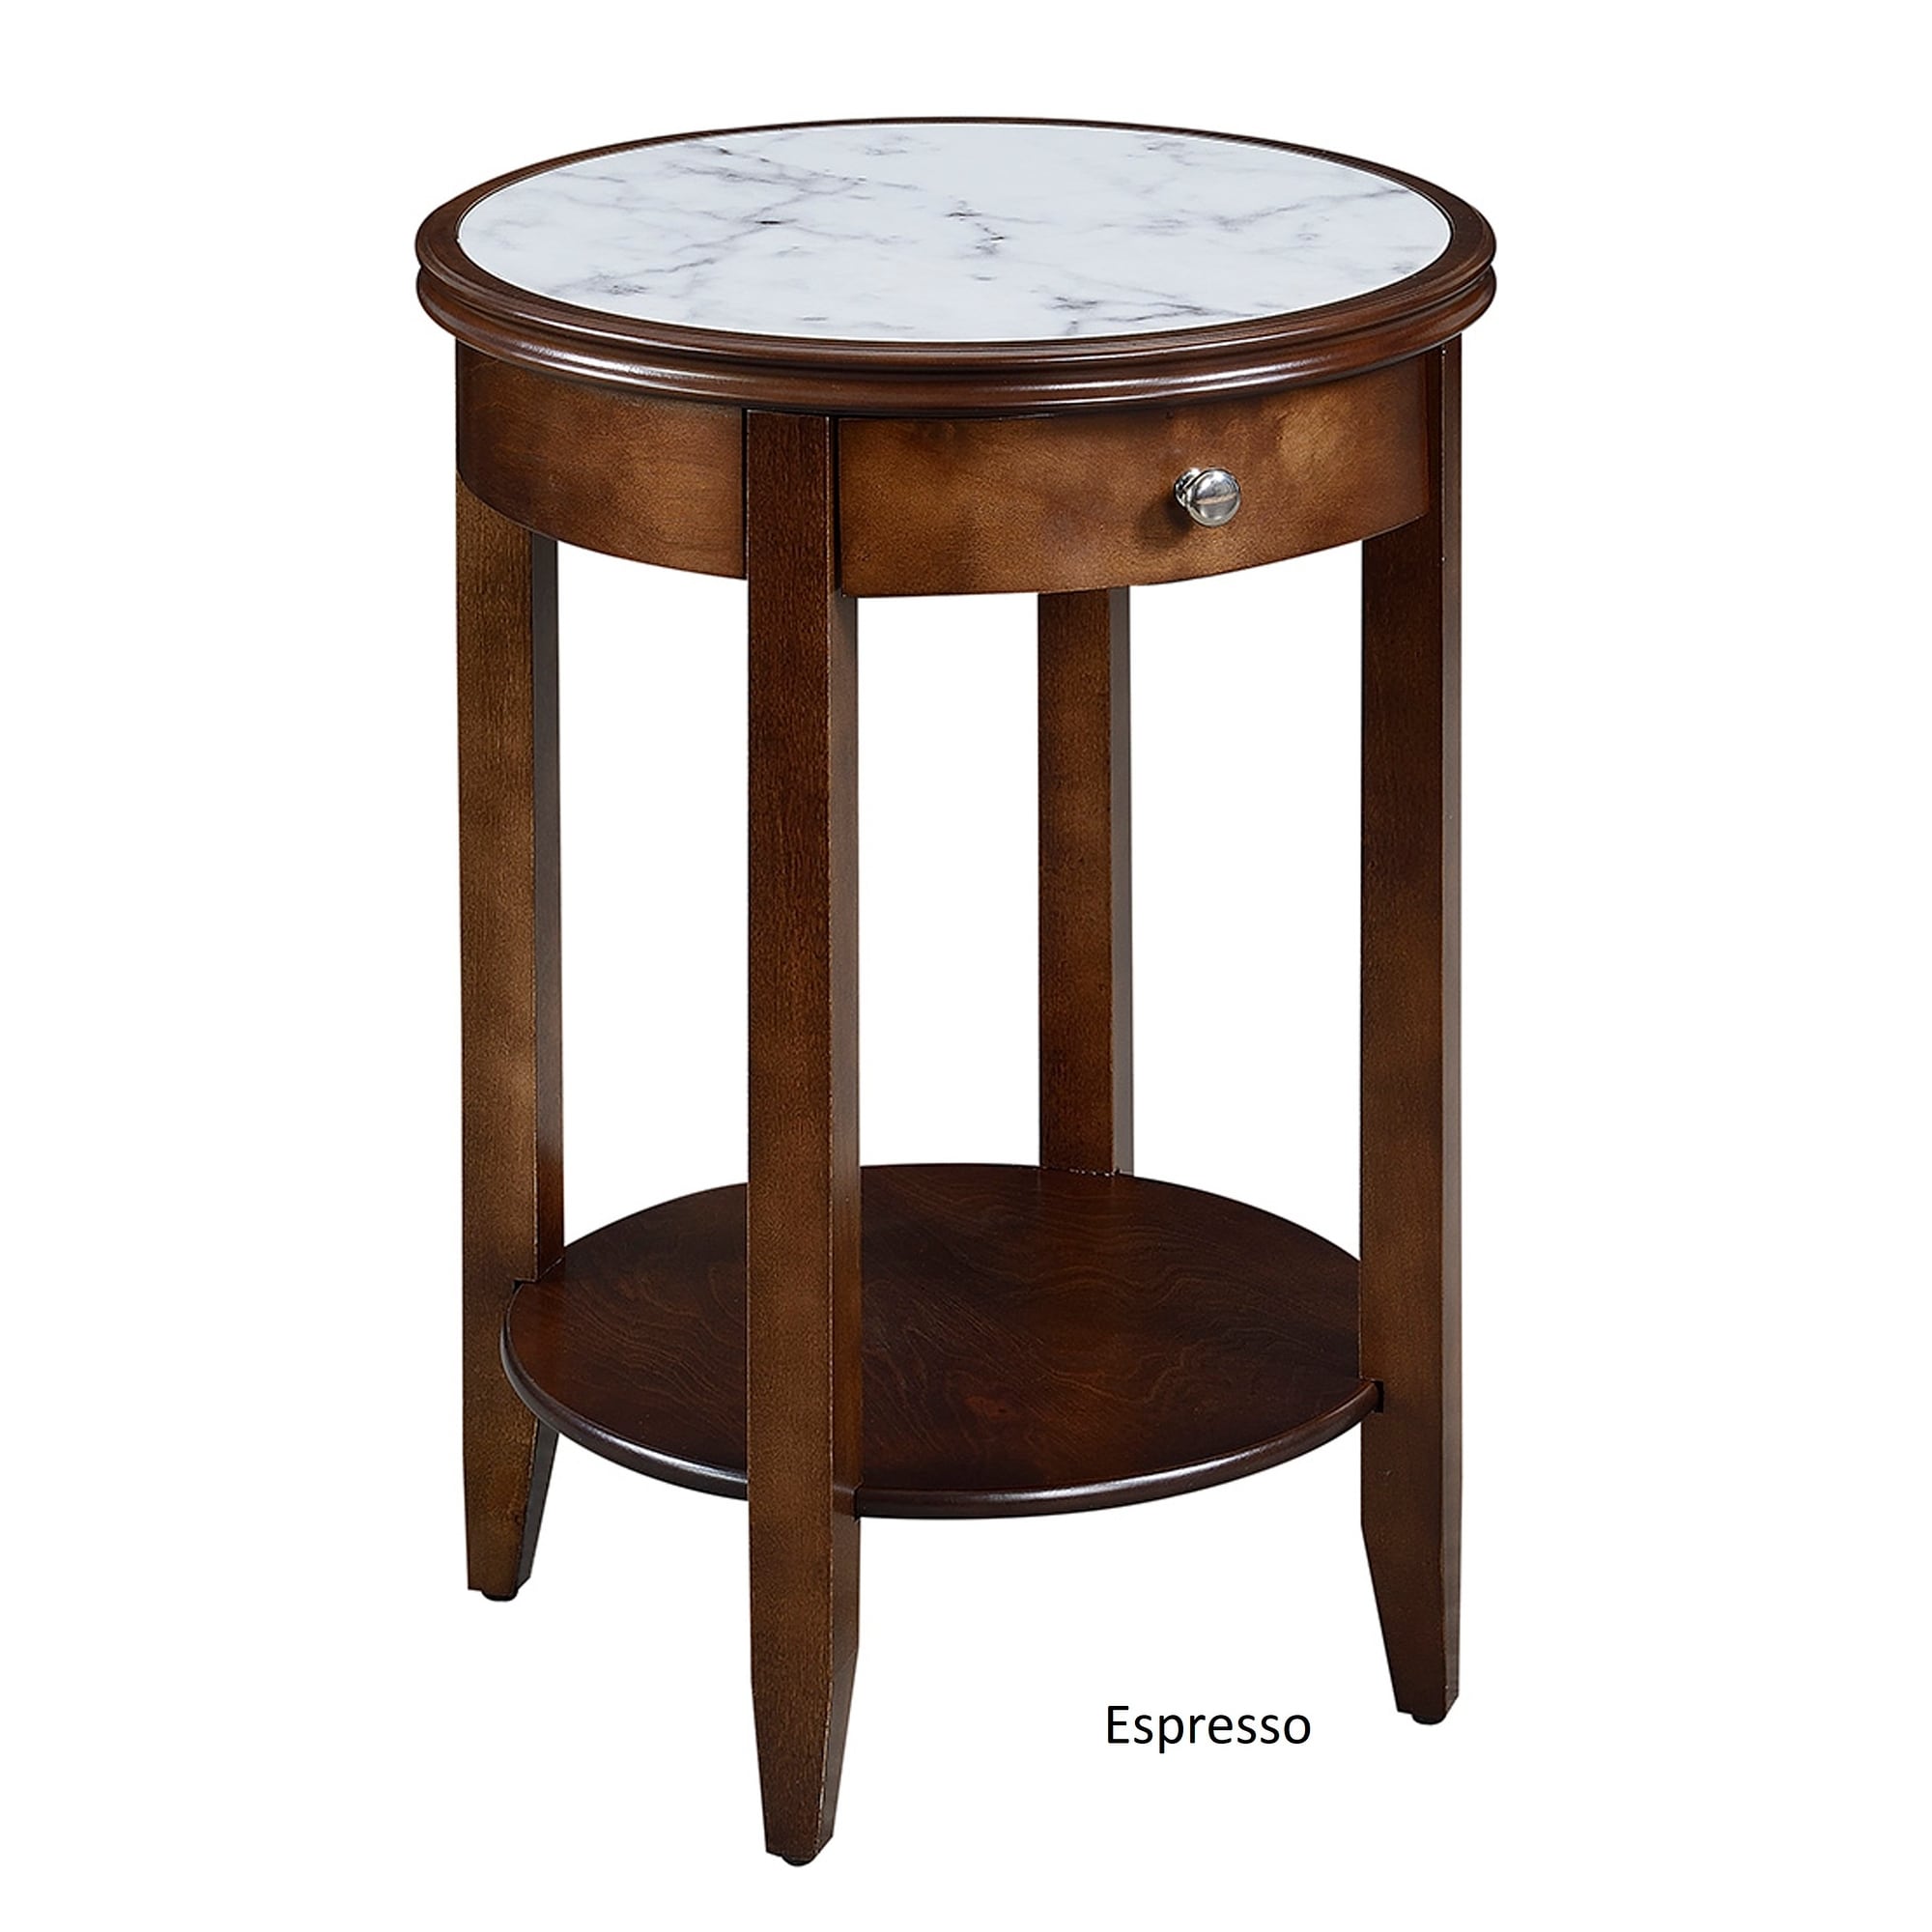 Details about   Copper Grove Hailey End Table With Drawer 